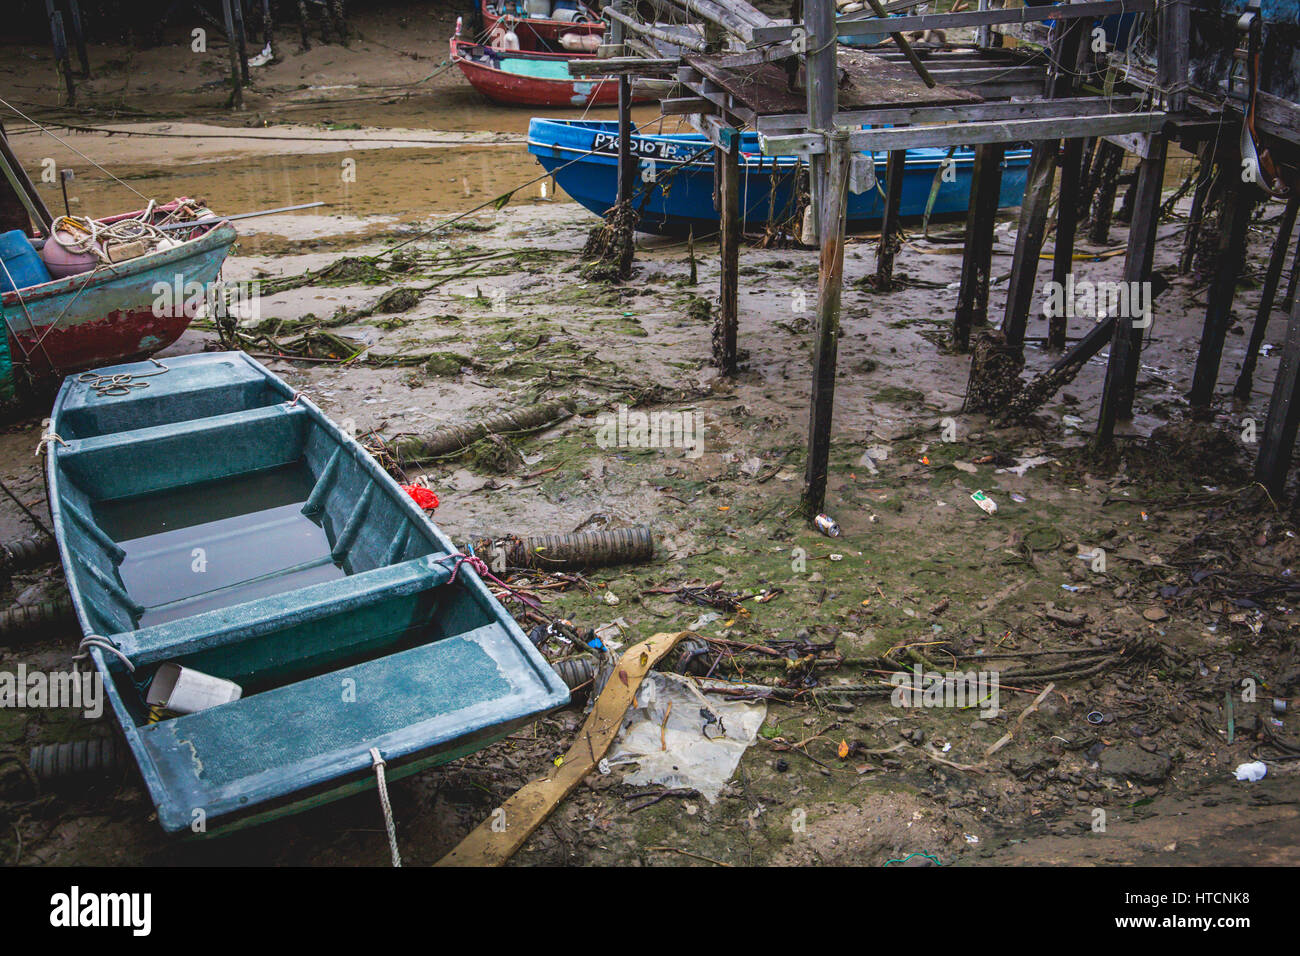 Rubbishes appear during low tide in Tai O fishing village, Hong Kong Stock Photo